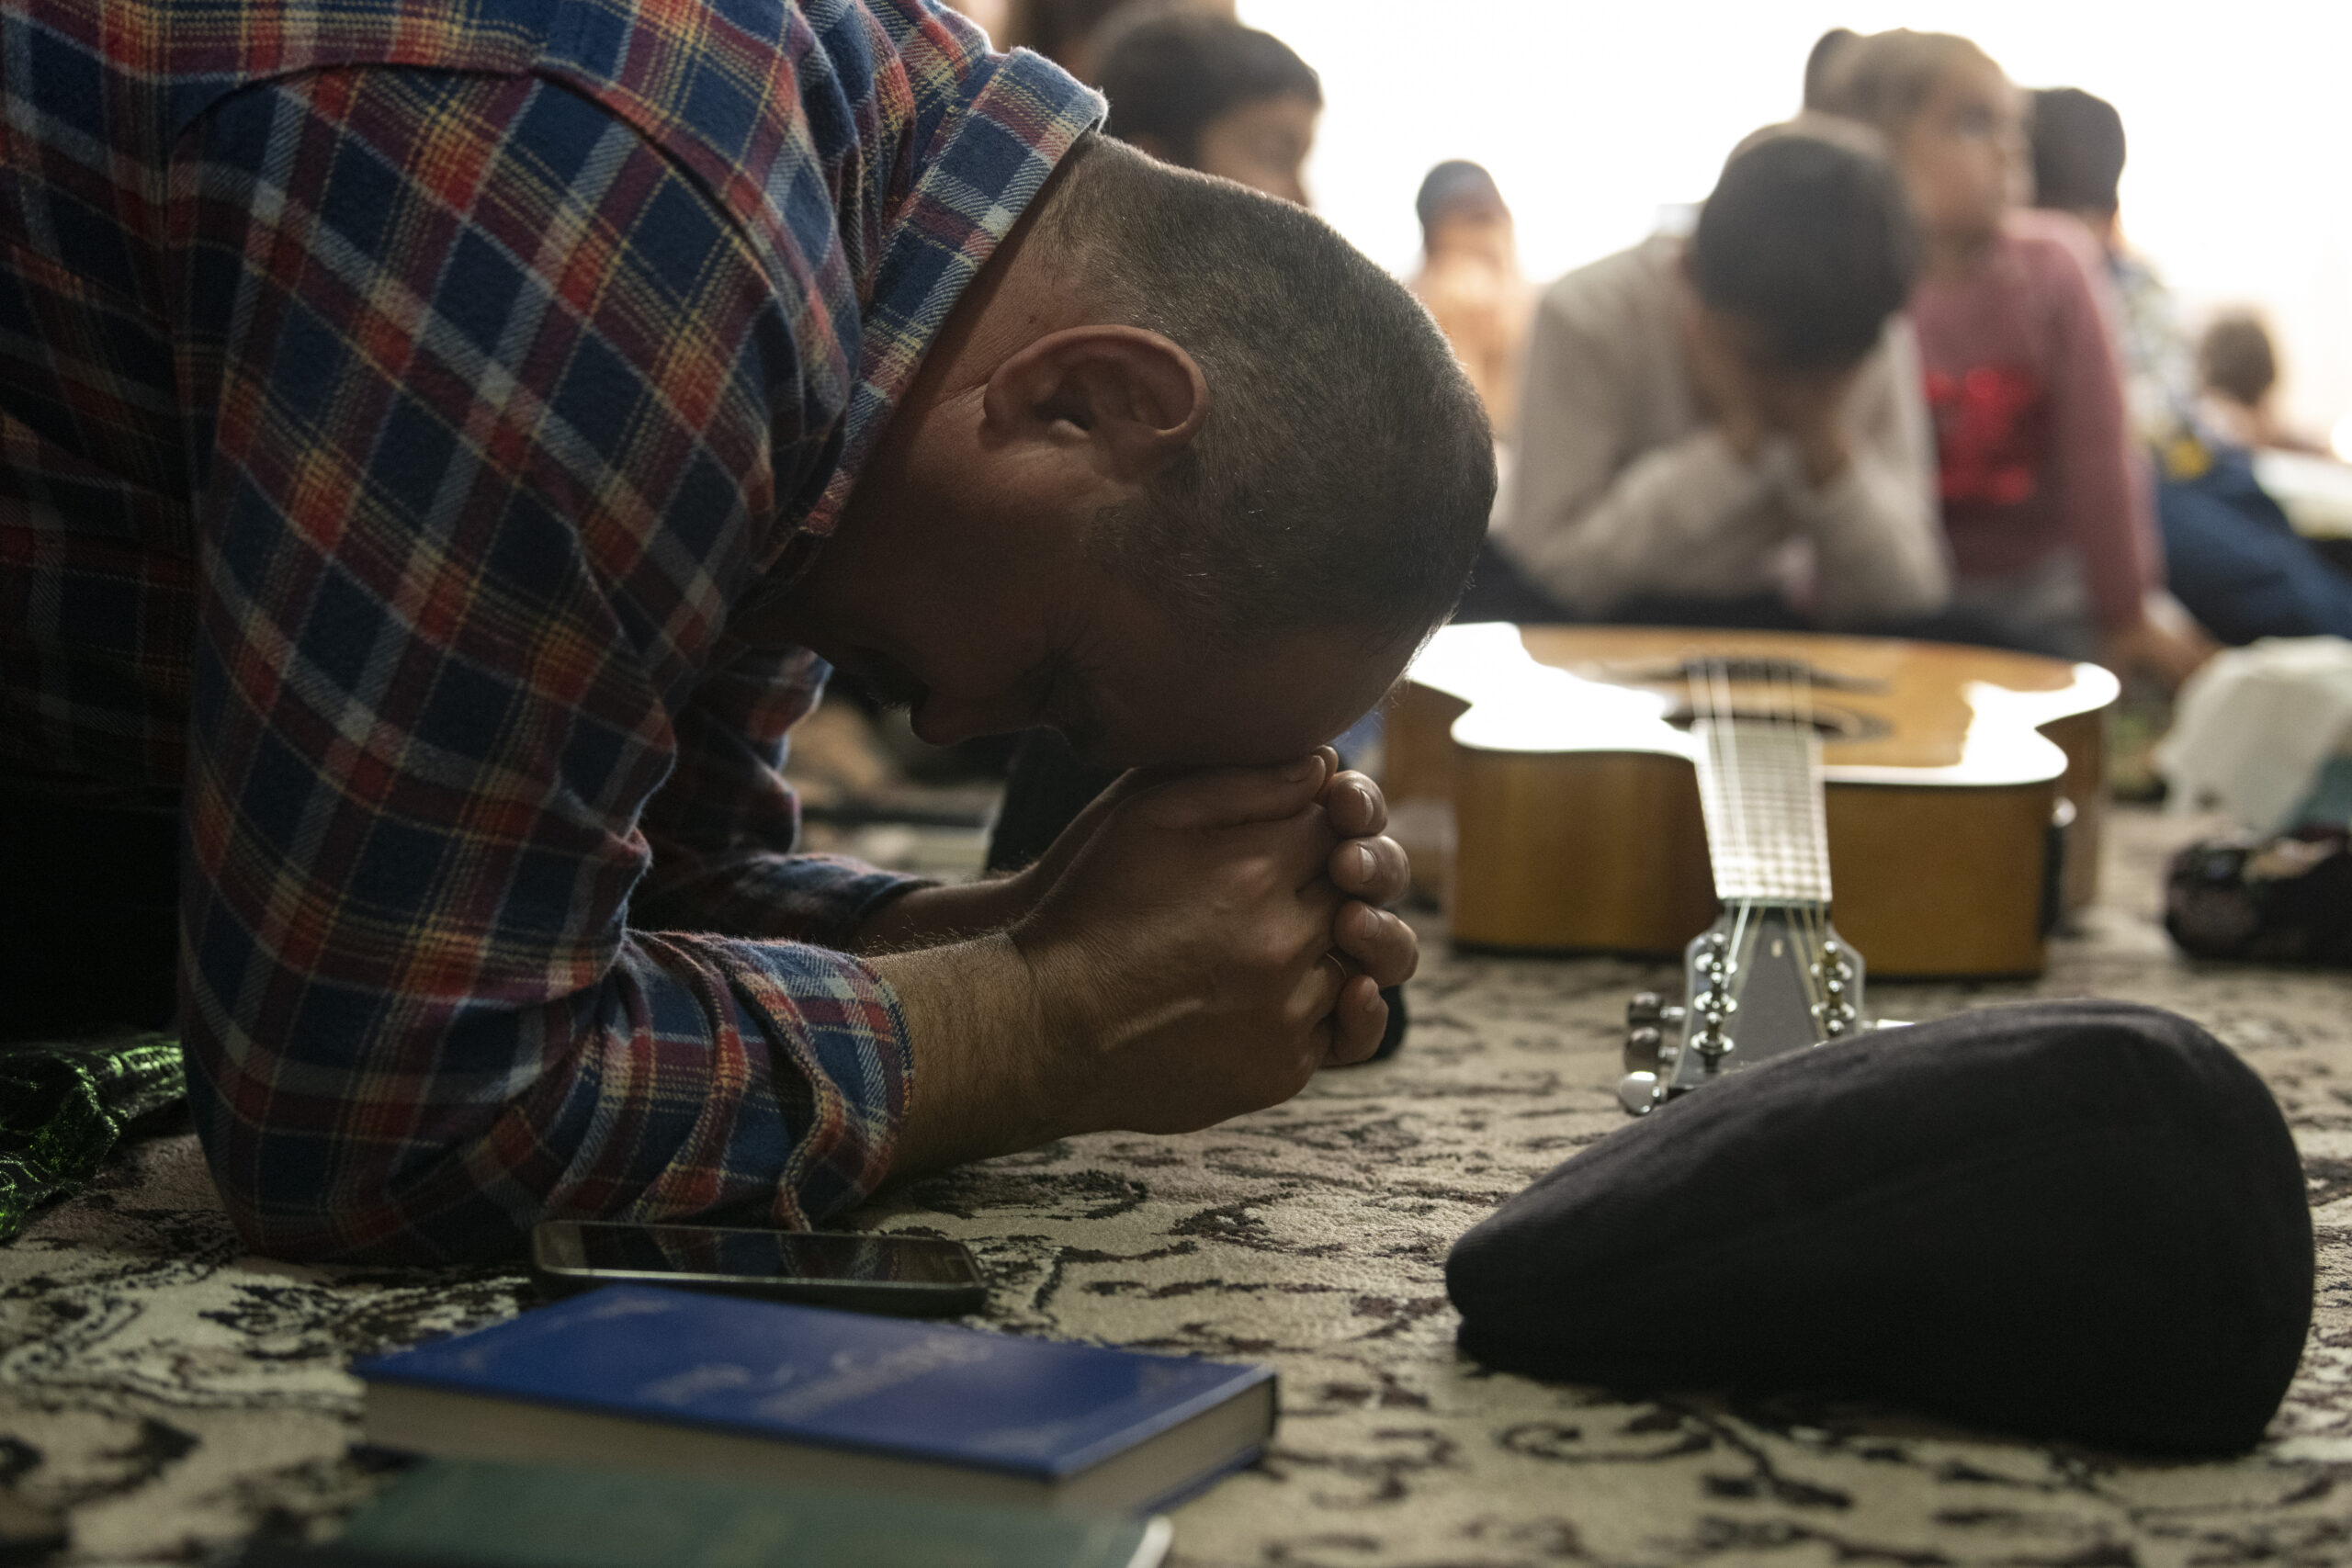 CENTRAL ASIA | SEP. 5, 2022 — Pastor Facing Possible Charges for Unregistered Churches